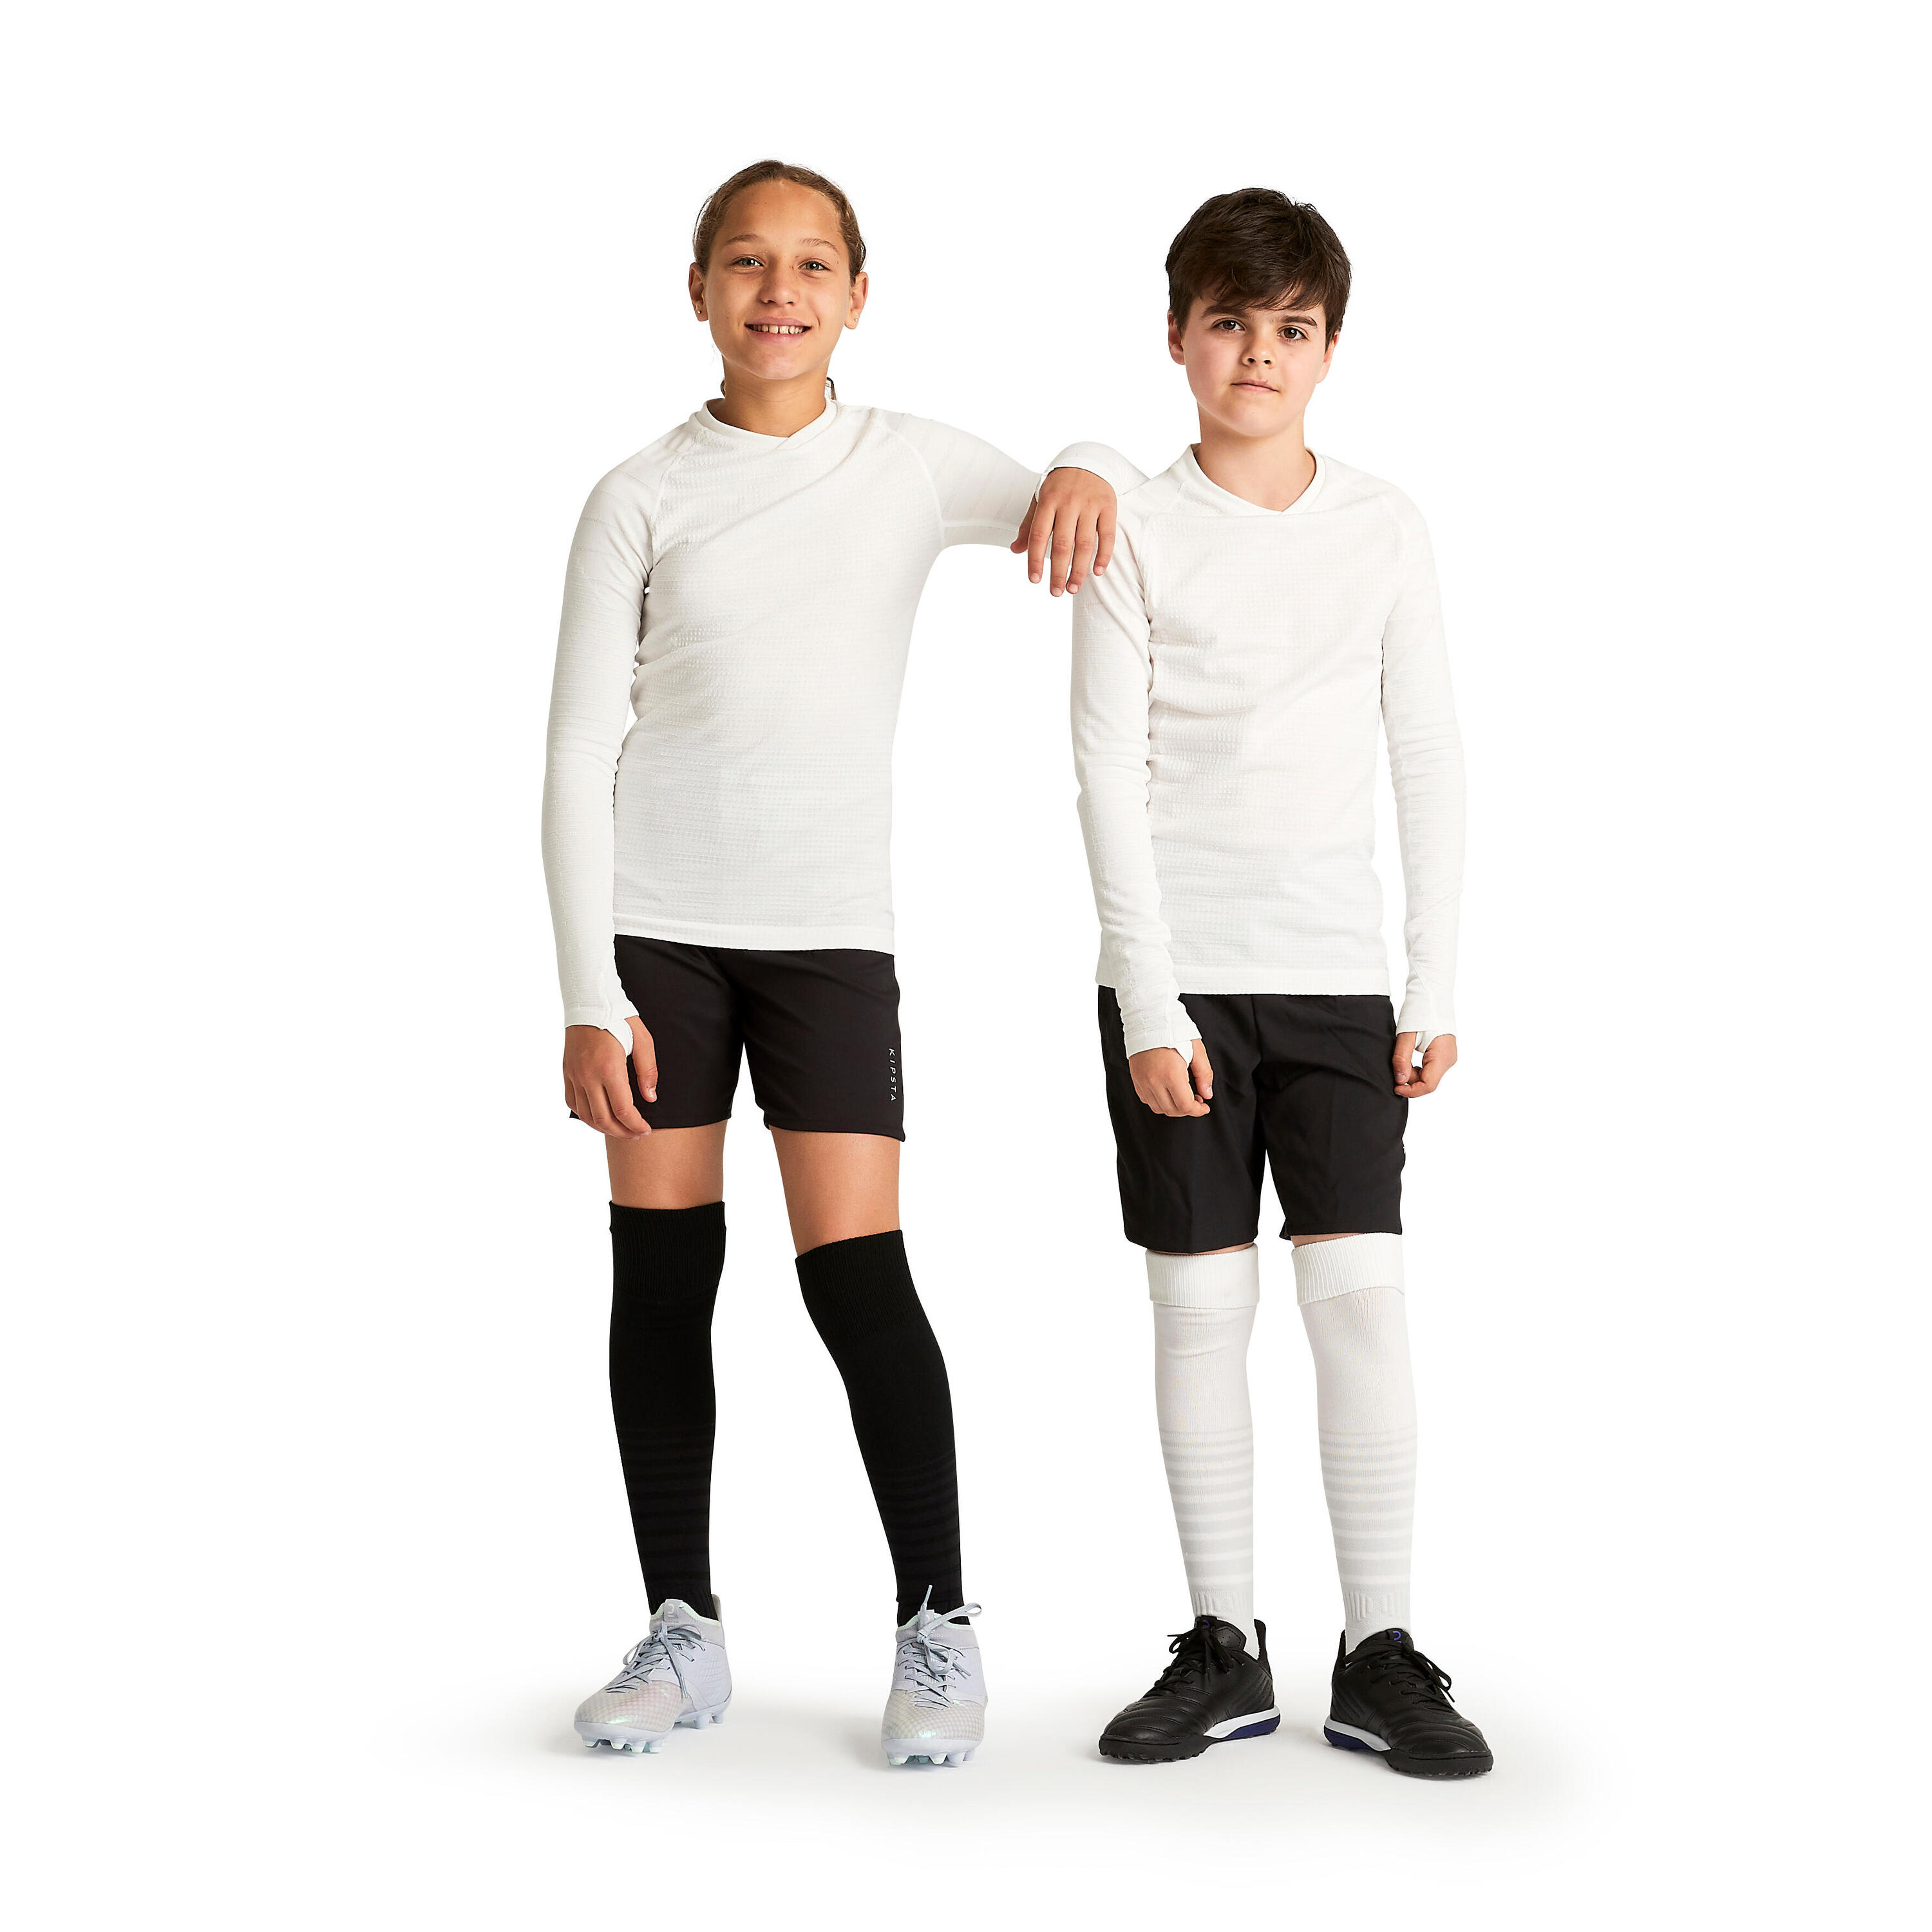 Kids' Long-Sleeved Thermal Base Layer Top Keepdry 500 - White 4/11